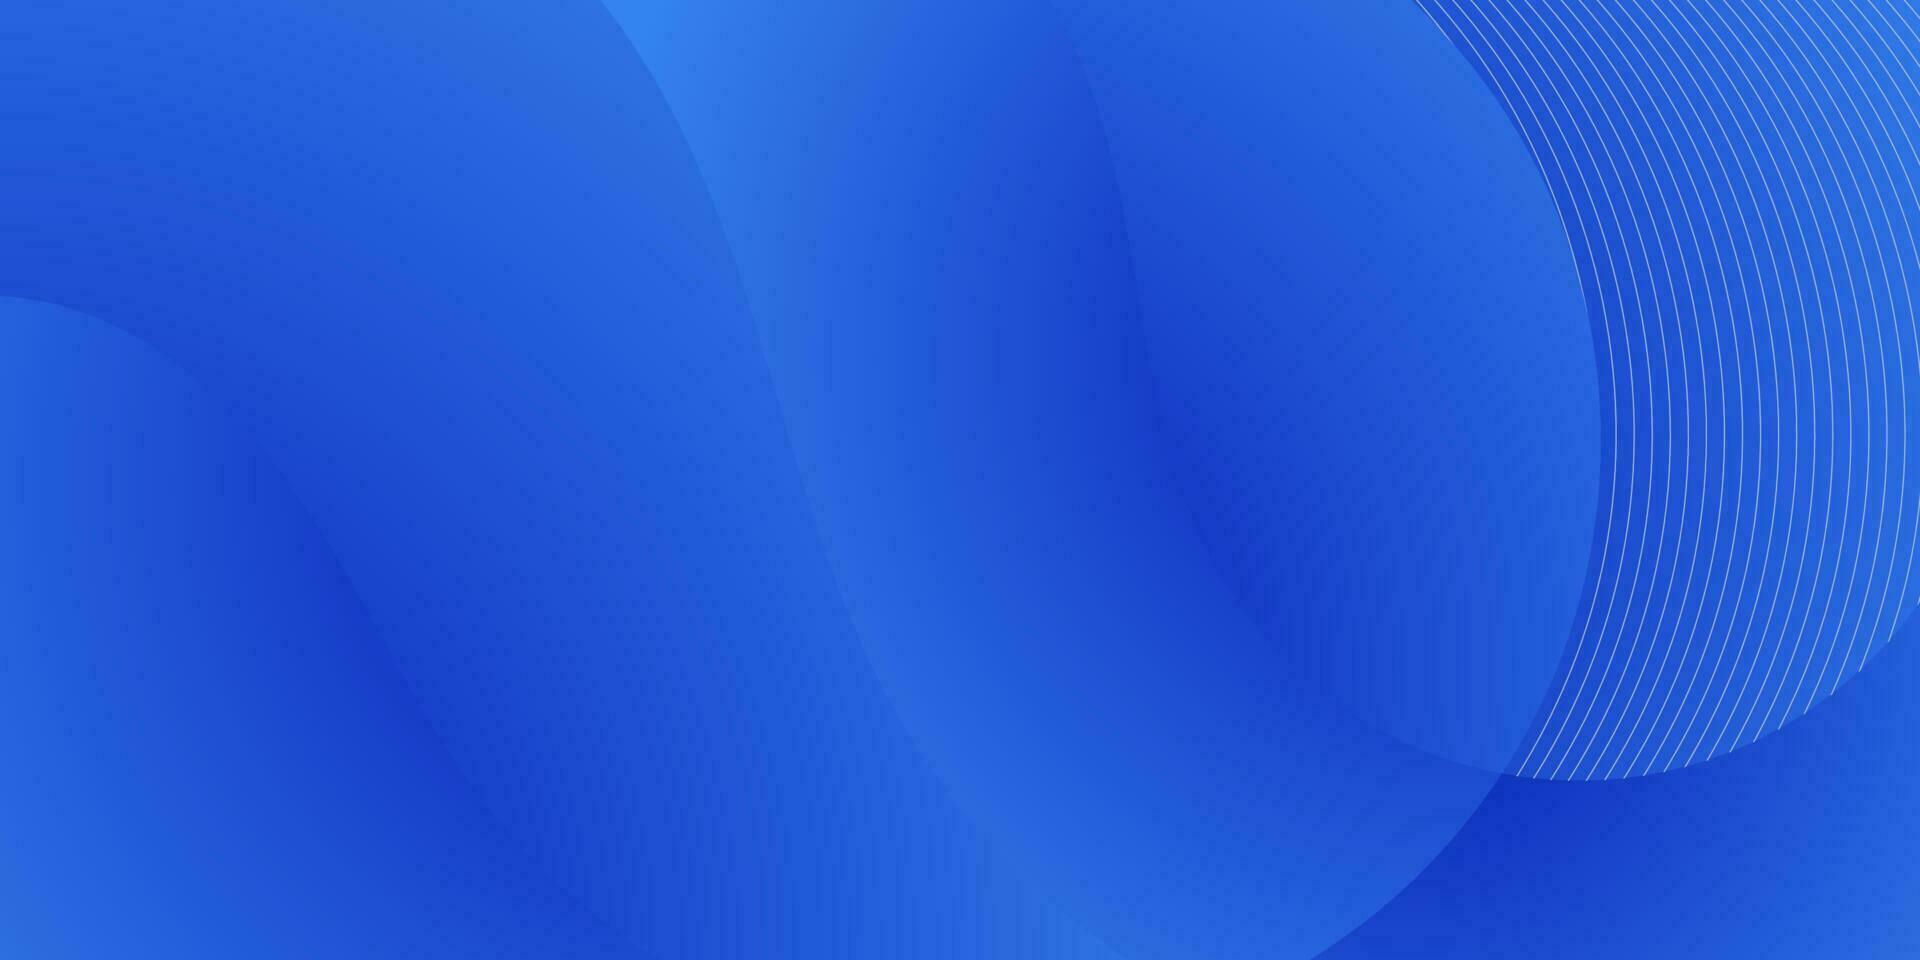 abstract blue wave gradient background vector